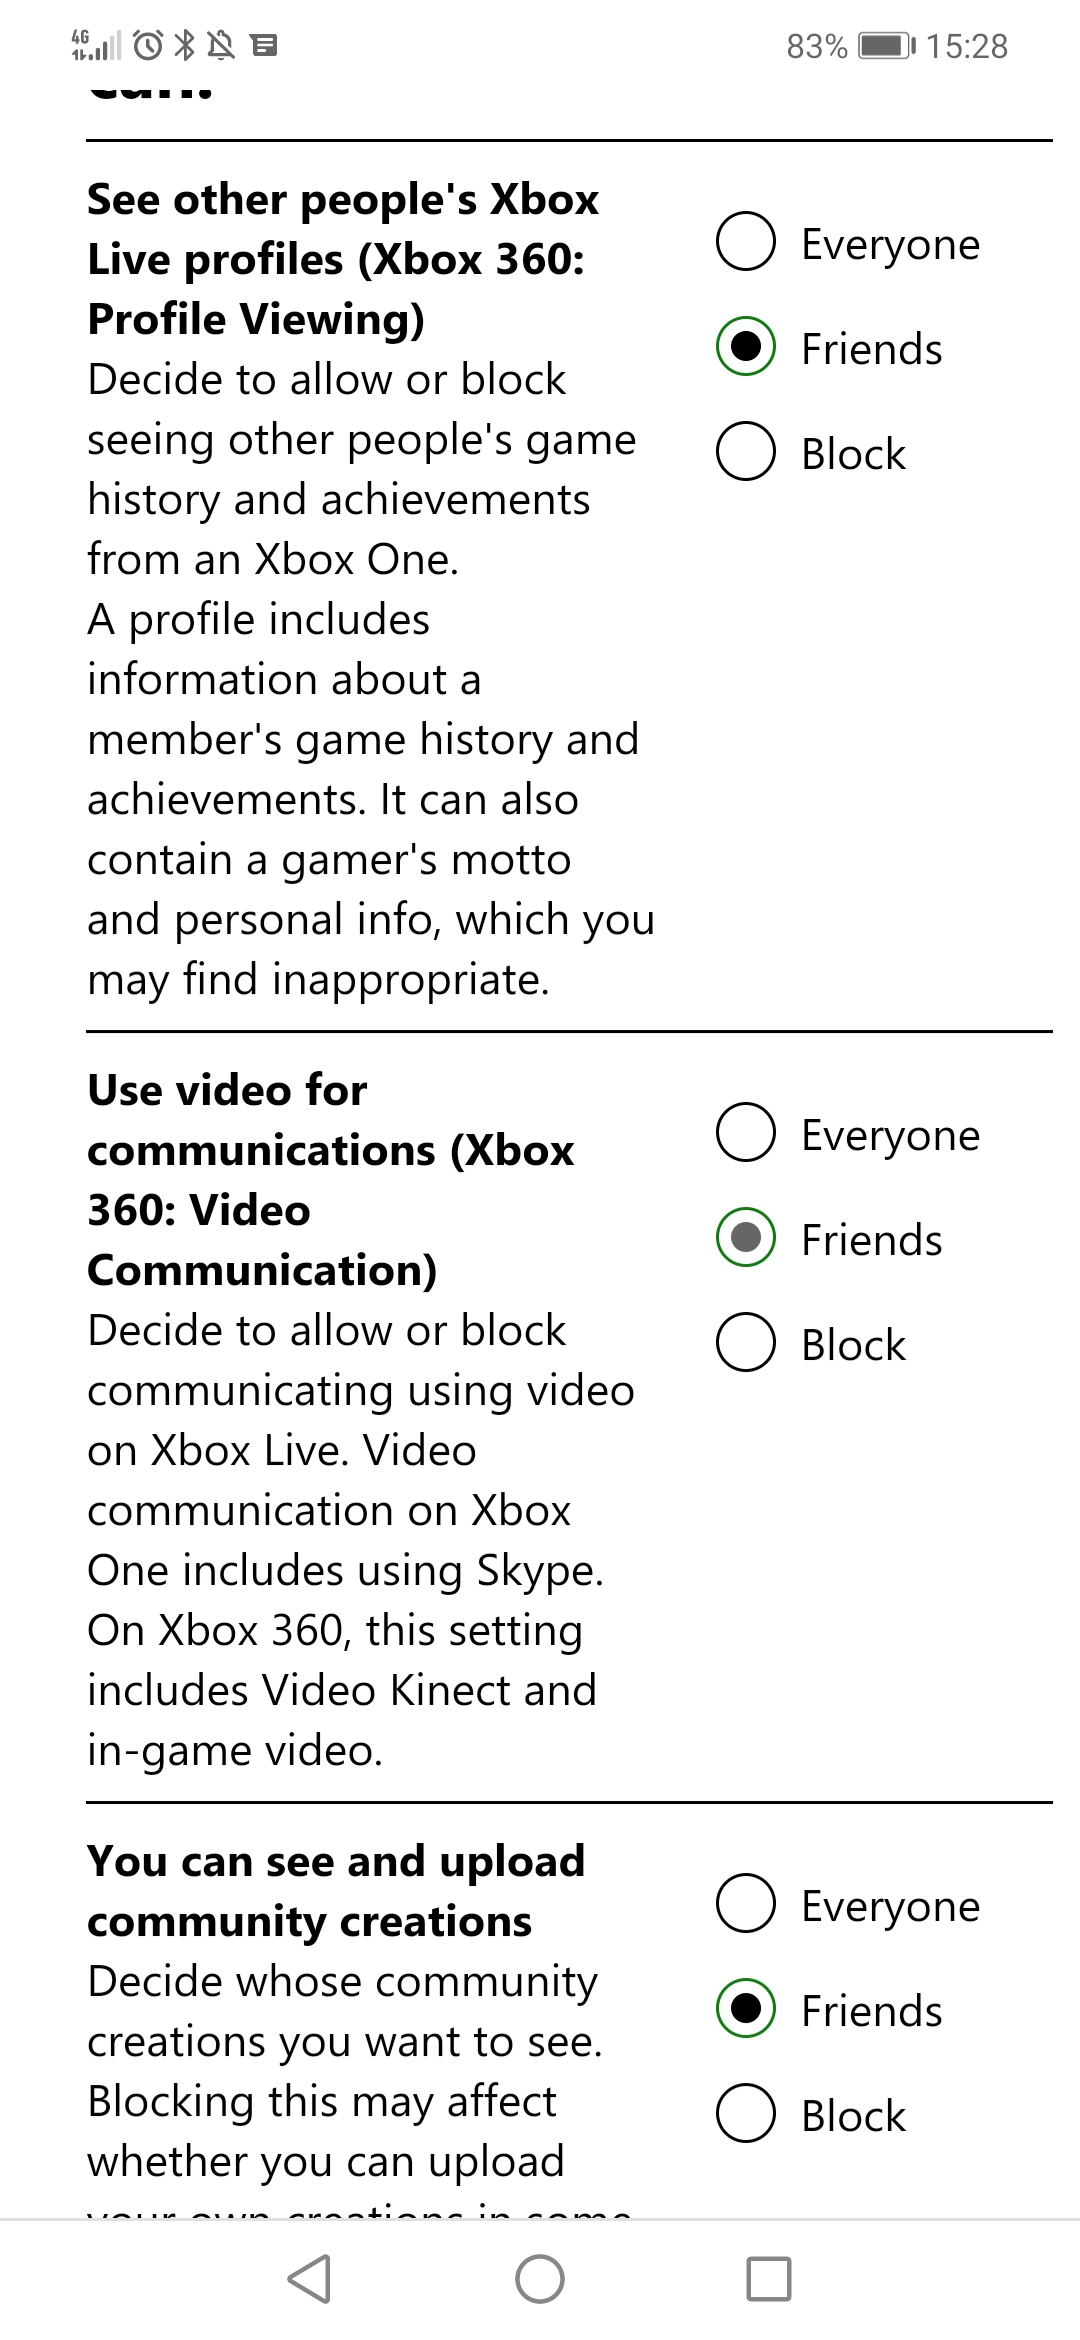 Roblox On Xbox One S Digital - does xbox one support roblox